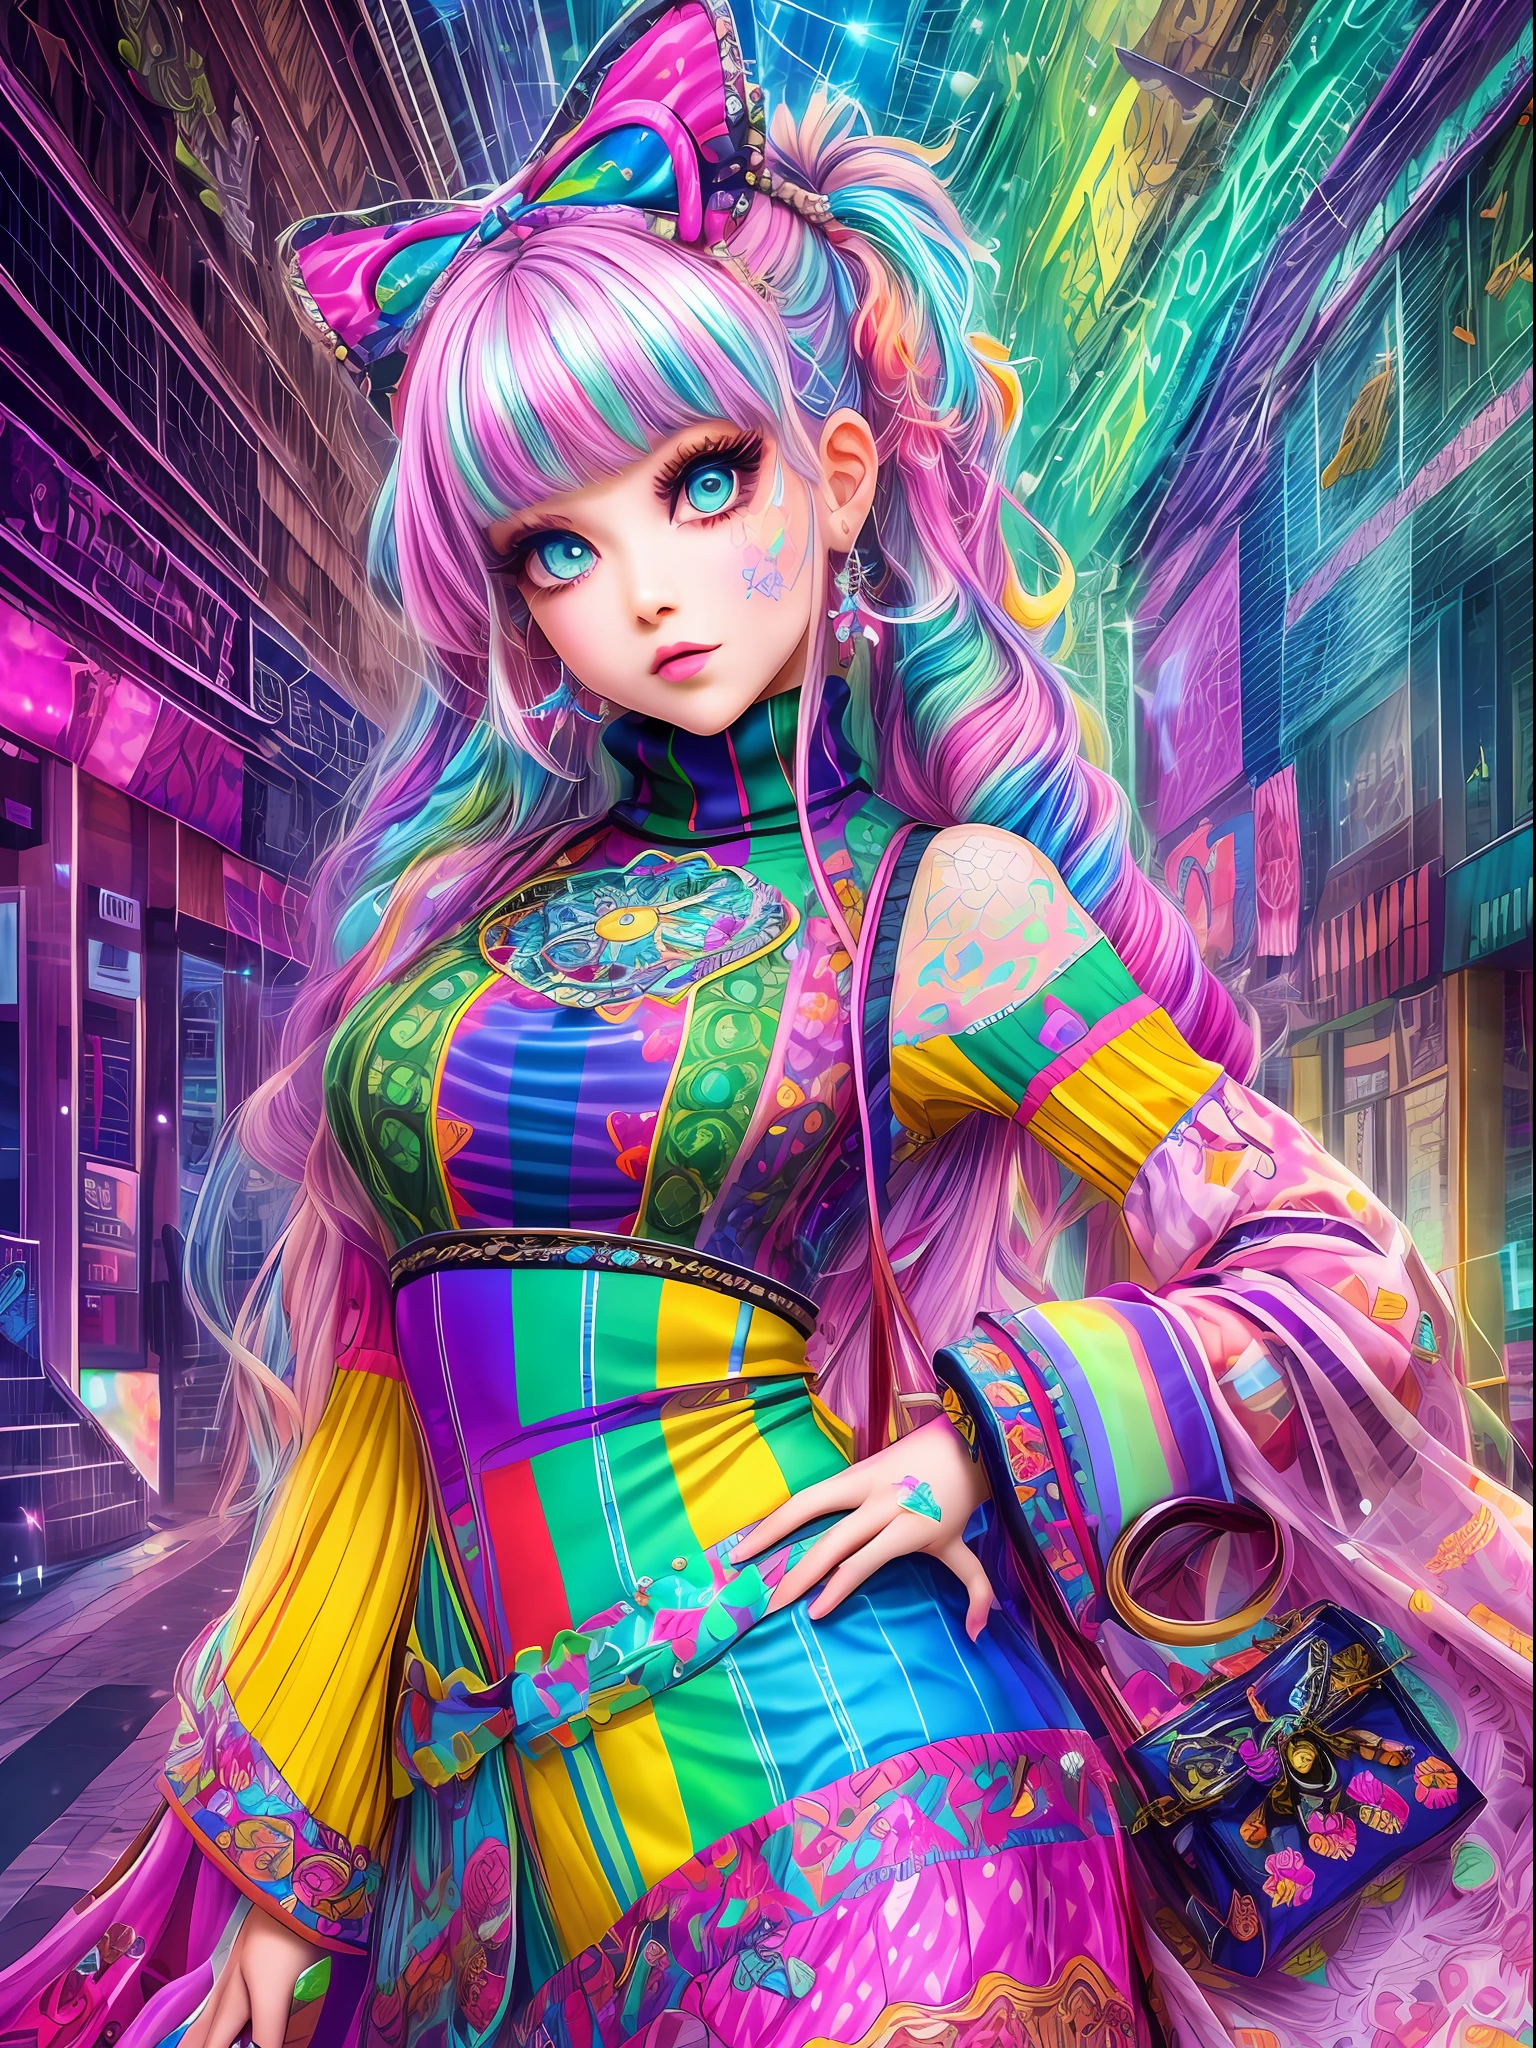 This image should be colorful and euphoric with extreme fantasy elements and very bold colors. Use (((lora:ArcherTurtleneck:1))). Generate a beautiful  witch with ornate and highly detailed Decora Harajuku fashion aesthetics on an interesting Harajuku street background. Her head, torso, and hips are in frame. The witch should have a mature face with a lot of character and an interested and happy expression. She should look interested in the viewer. Include beautiful and distinct eyes, highly detailed eyes, extremely detailed eyes, intricate eyes, 8K eyes, macro eyes. Pay close attention to intricate facial details and realistic eye shading. Include bright lisa frank rainbow colors. ((Include many realistic fantasy and rainbow Harajuku and decora details)). Clothing should be very detailed and intricate in the style of extravagant Harajuku decora street fashion with a heavy emphasis on rainbow colors. Her shirt should contain contrasting textures, colors, and patterns (((lora:ArcherTurtleneck:1))). Her pants should be highly detailed and contain contrasting textures, colors, and patterns. The image is the highest quality possible, with rich colors and an extremely high resolution. Consider influences like the artwork and colors of Lisa Frank. Utilize bright ambient lighting and dynamic composition to enhance a feeling of happiness and ((euphoria)). The image should contain shimmer, phantasmal iridescence, crystals, and bumps. (((lora:ArcherTurtleneck:1))). (((Include many decora fashion accents.))), extreme angles, extremely detailed magical elements